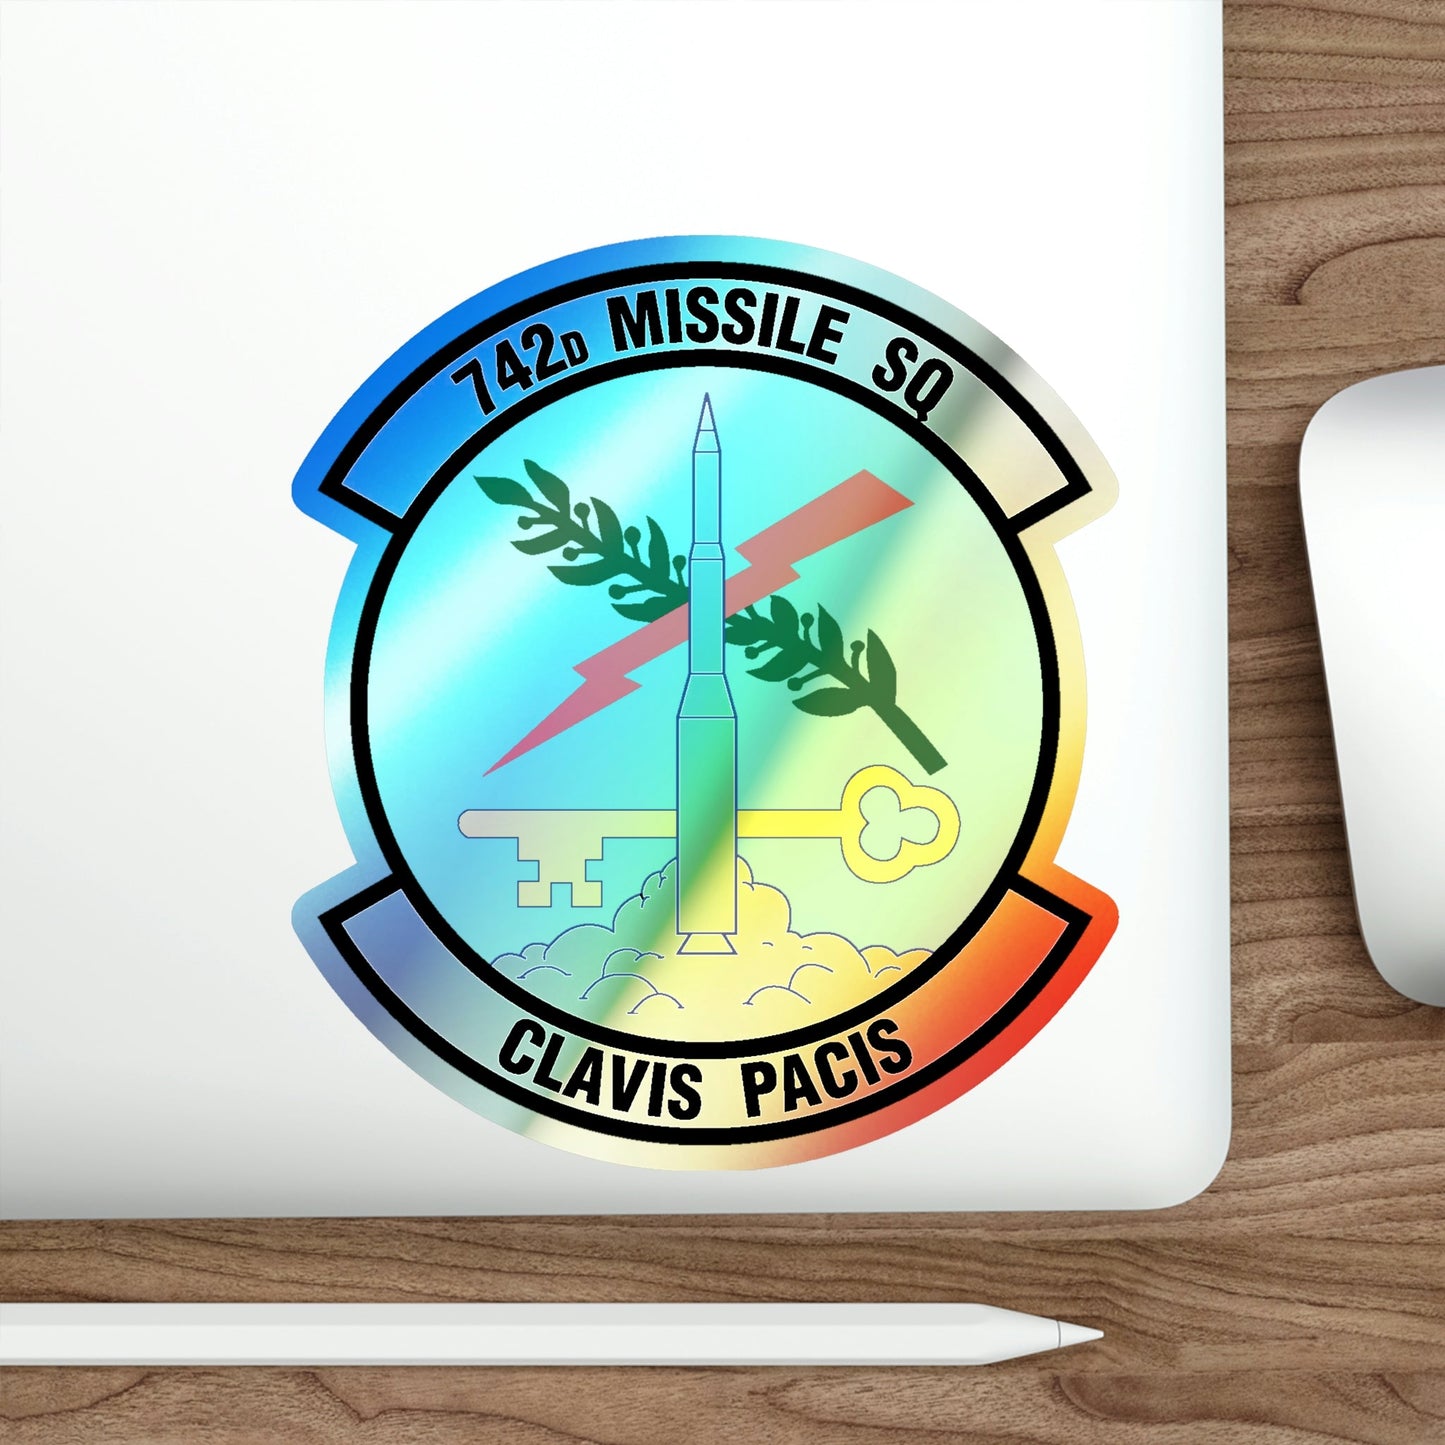 742 Missile Squadron AFGSC (U.S. Air Force) Holographic STICKER Die-Cut Vinyl Decal-The Sticker Space